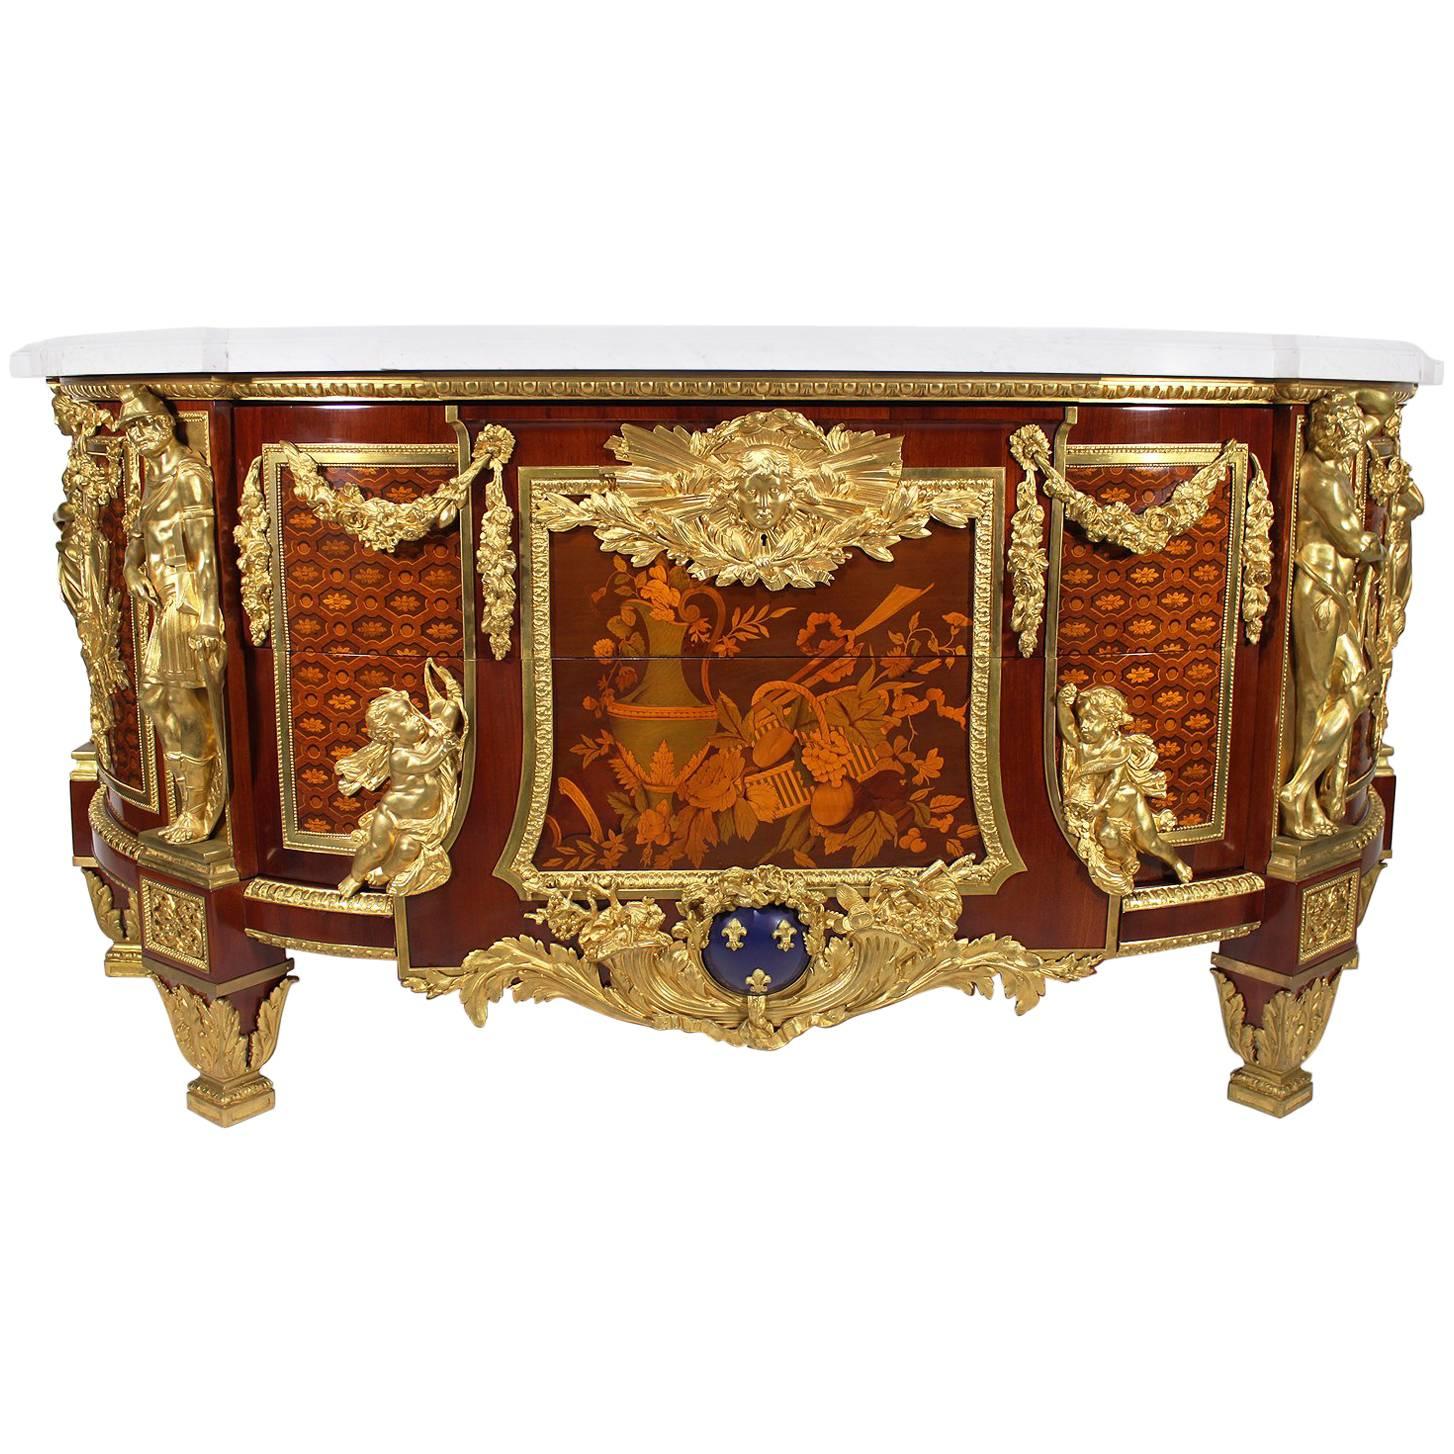 Fine French 19th Century Louis XVI Style Marquetry & Gilt-Bronze Mounted Commode For Sale